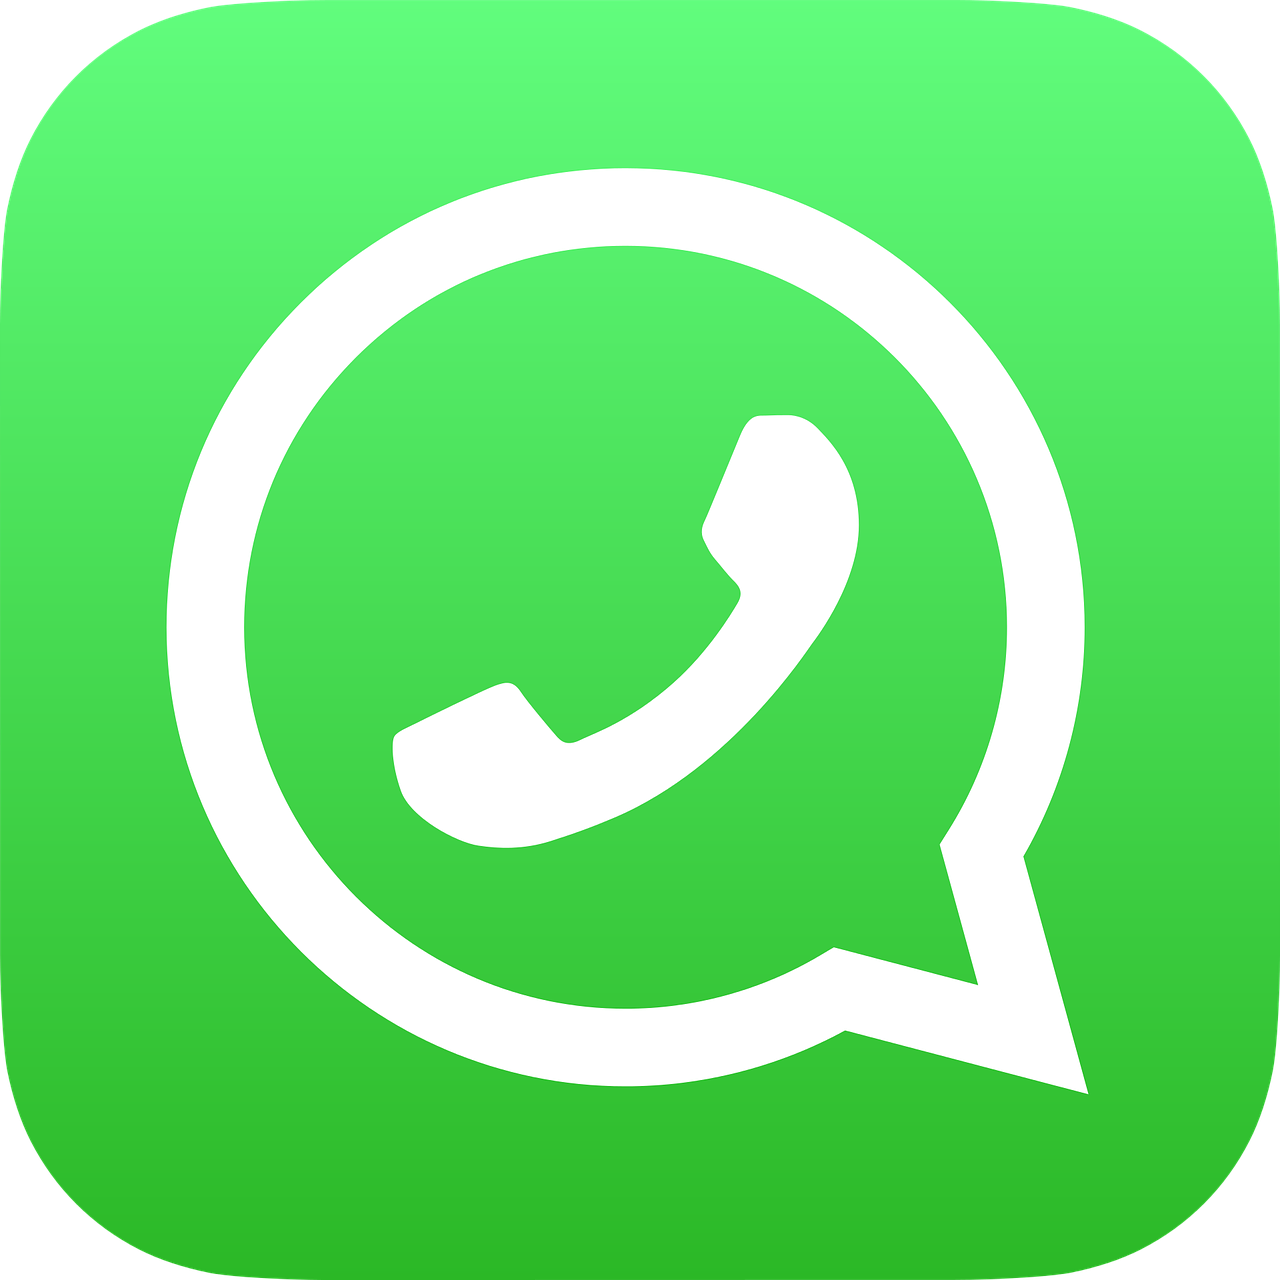 Download Messaging Whatsapp Apps Android Instant Free Transparent Image ...